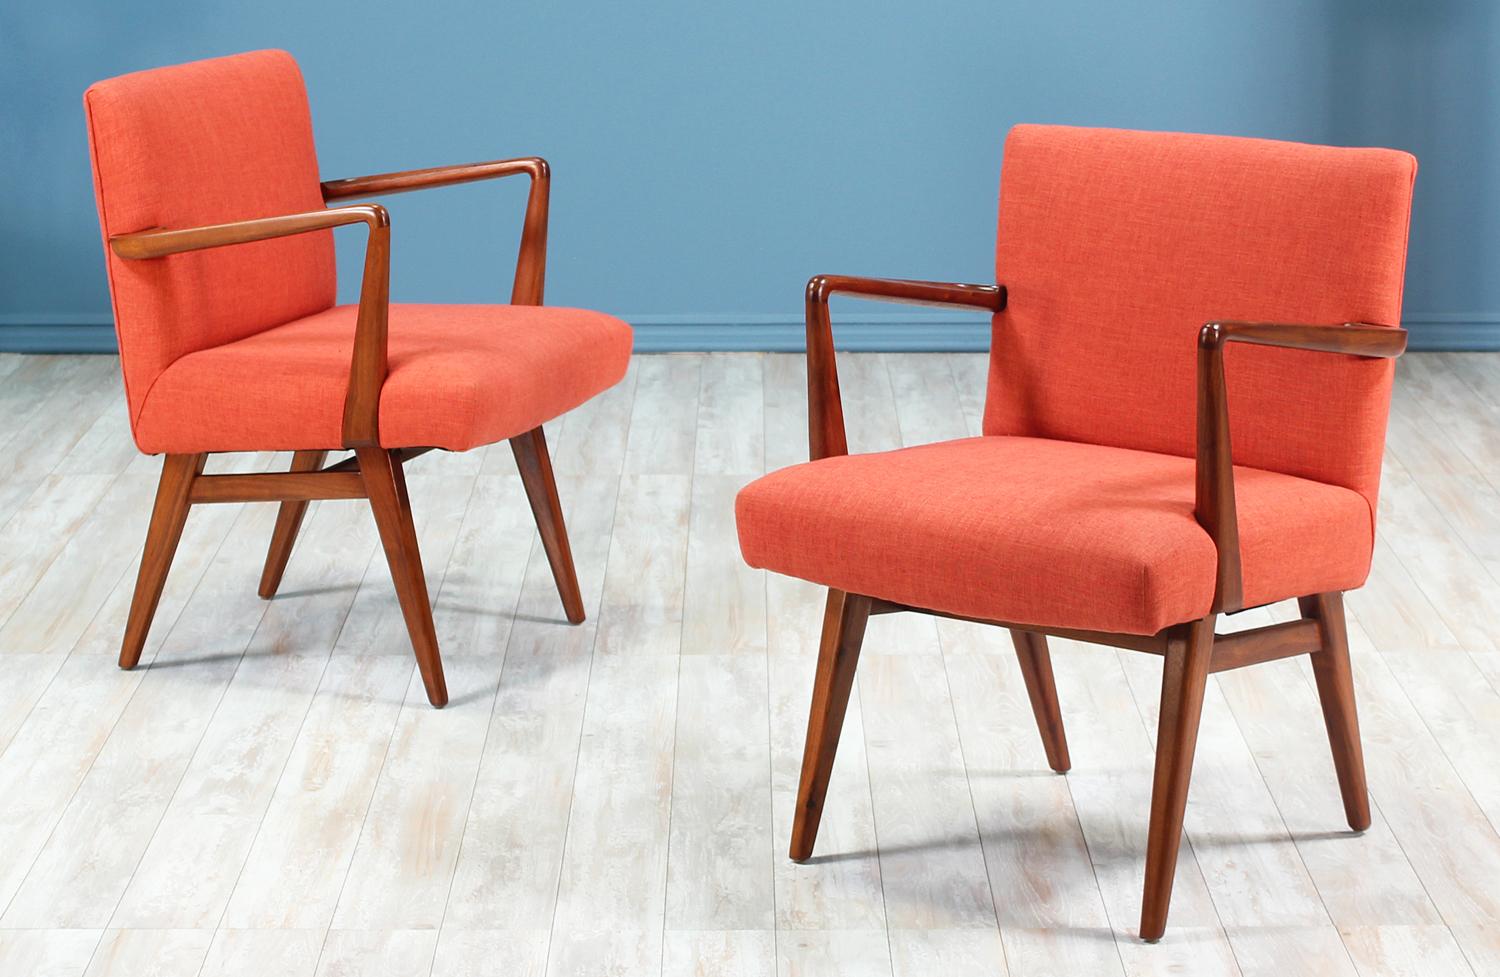 Pair of easy chairs designed by Jens Risom for Knoll Inc. in the United States circa 1950’s. These stylish chairs feature a solid walnut wood frame with tapered legs and carved angled arm-rests. The seats have been recently upholstered in a soft